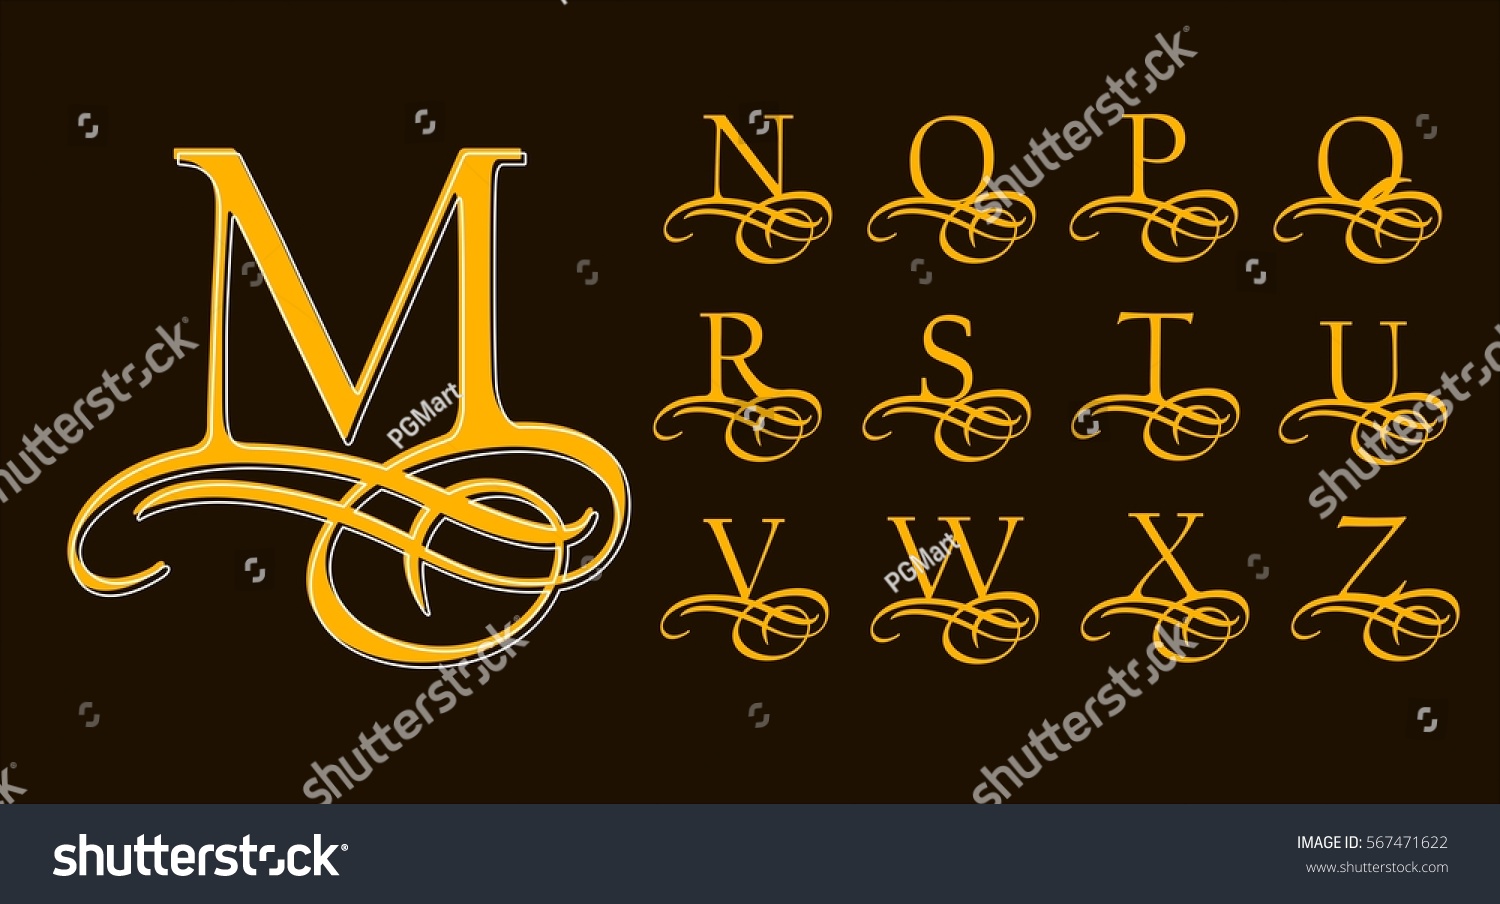 Vintage Set 2 Calligraphic Capital Letters Stock Vector (Royalty Free ...